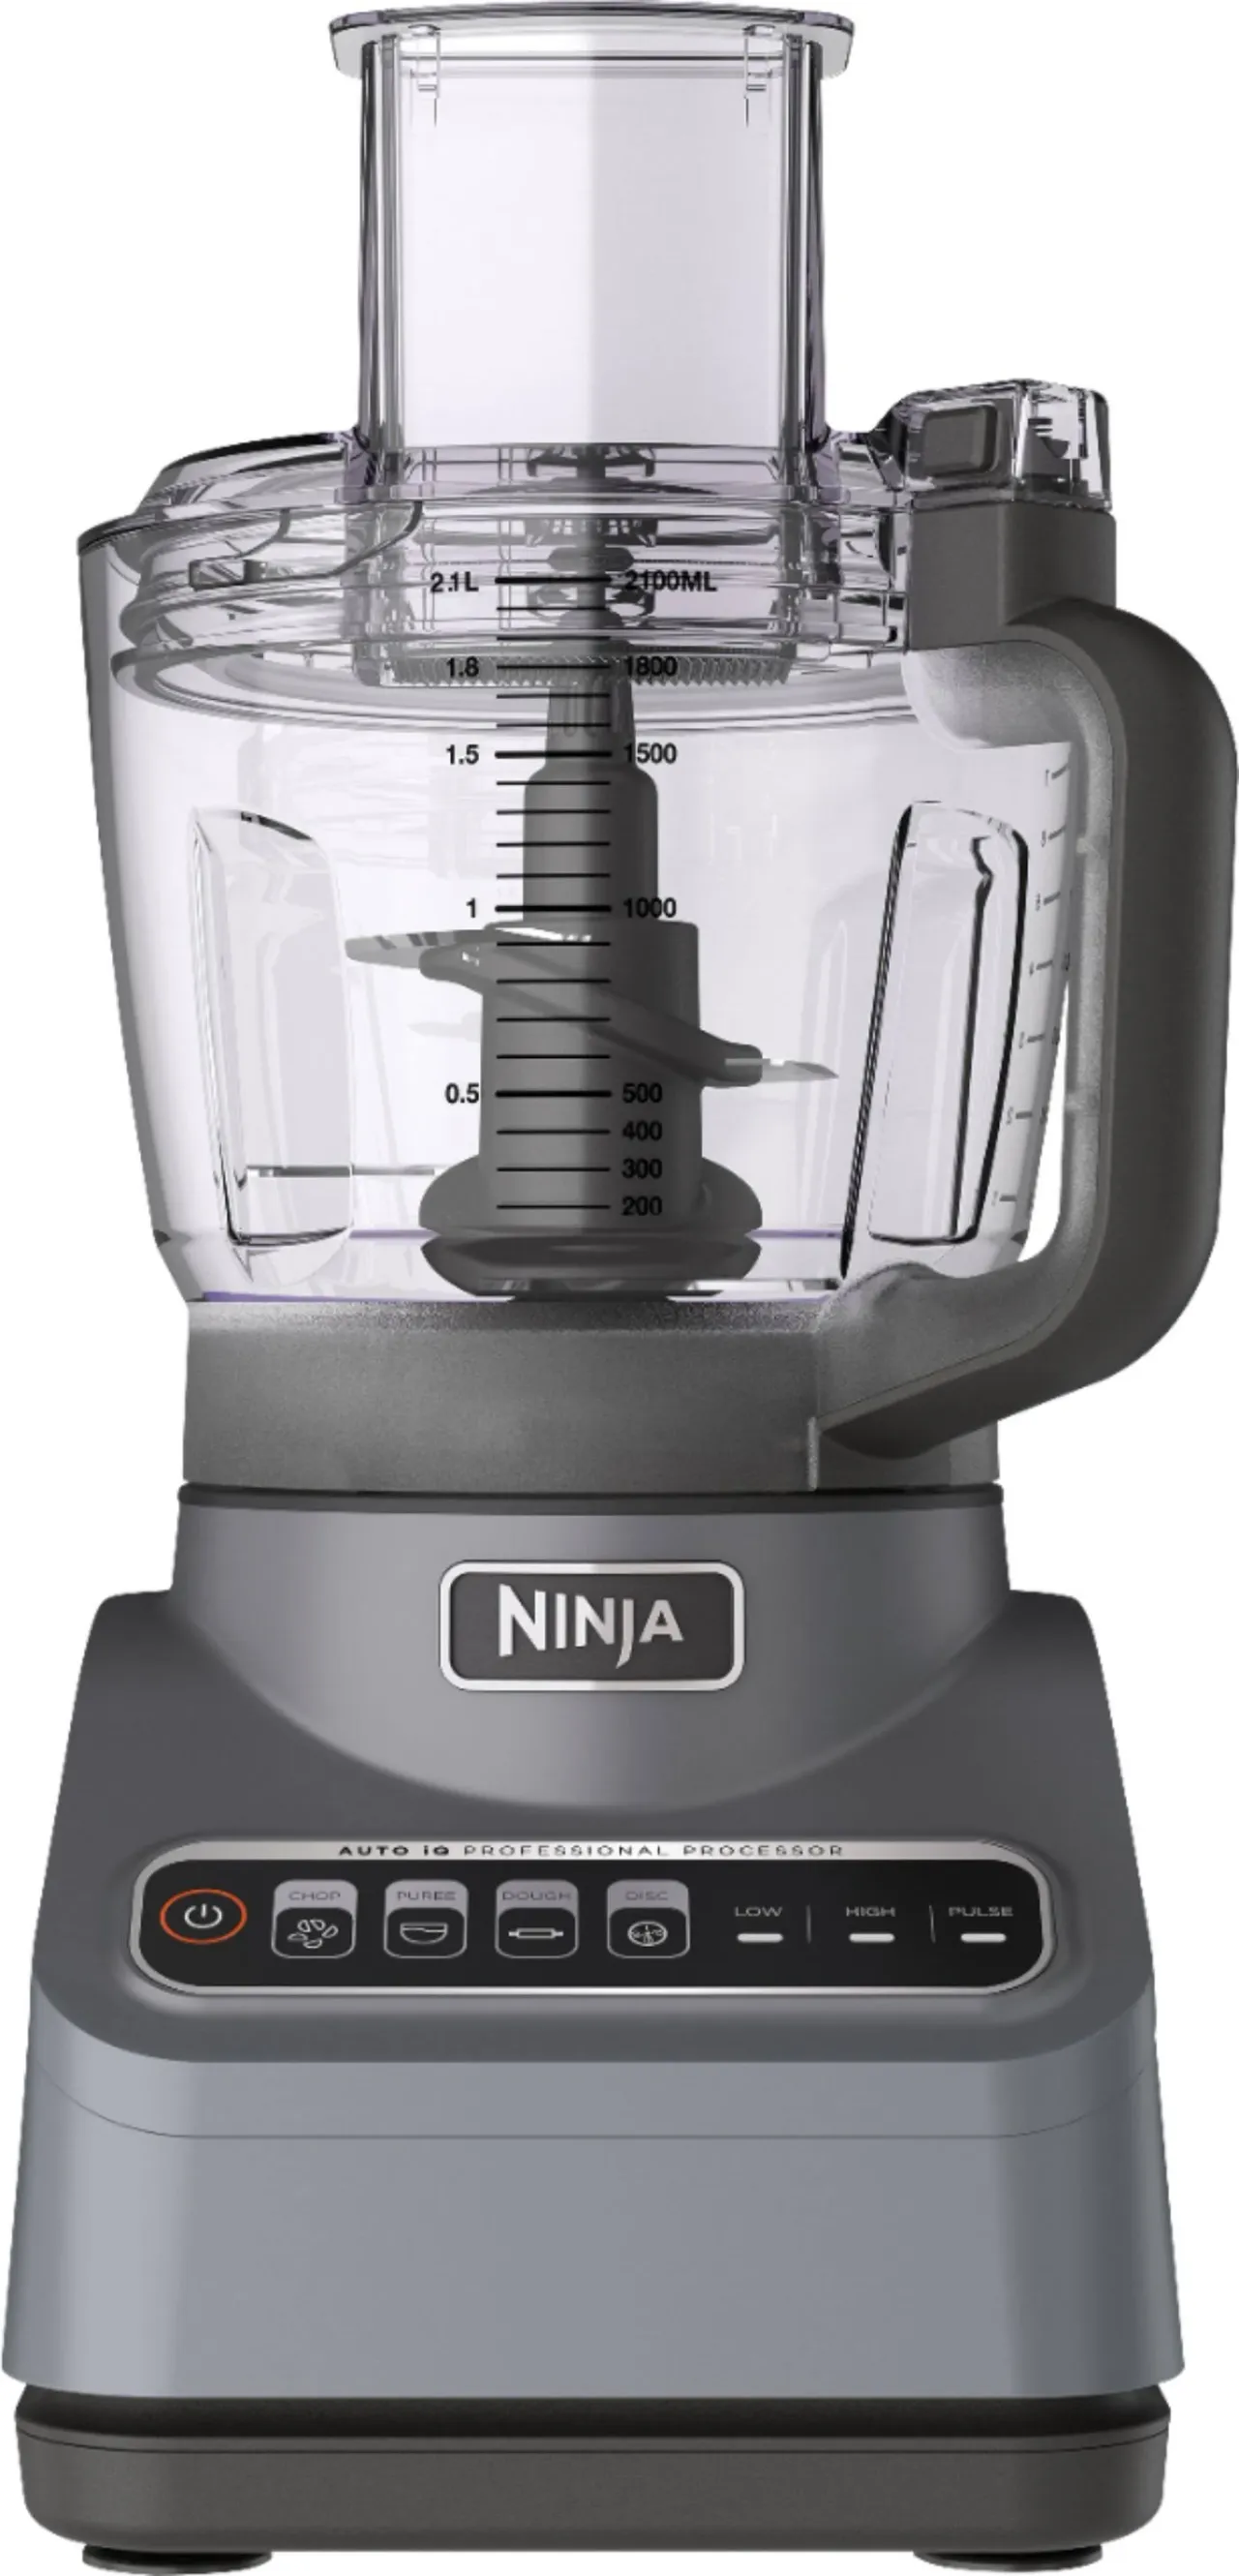 6 Ninja BN601 Professional Plus Food Processor, 1000 Peak Watts, 4 Functions for Chopping, Slicing, Purees & Dough with 9-Cup Processor Bowl, 3 Blades, Food Chute & Pusher, Silver